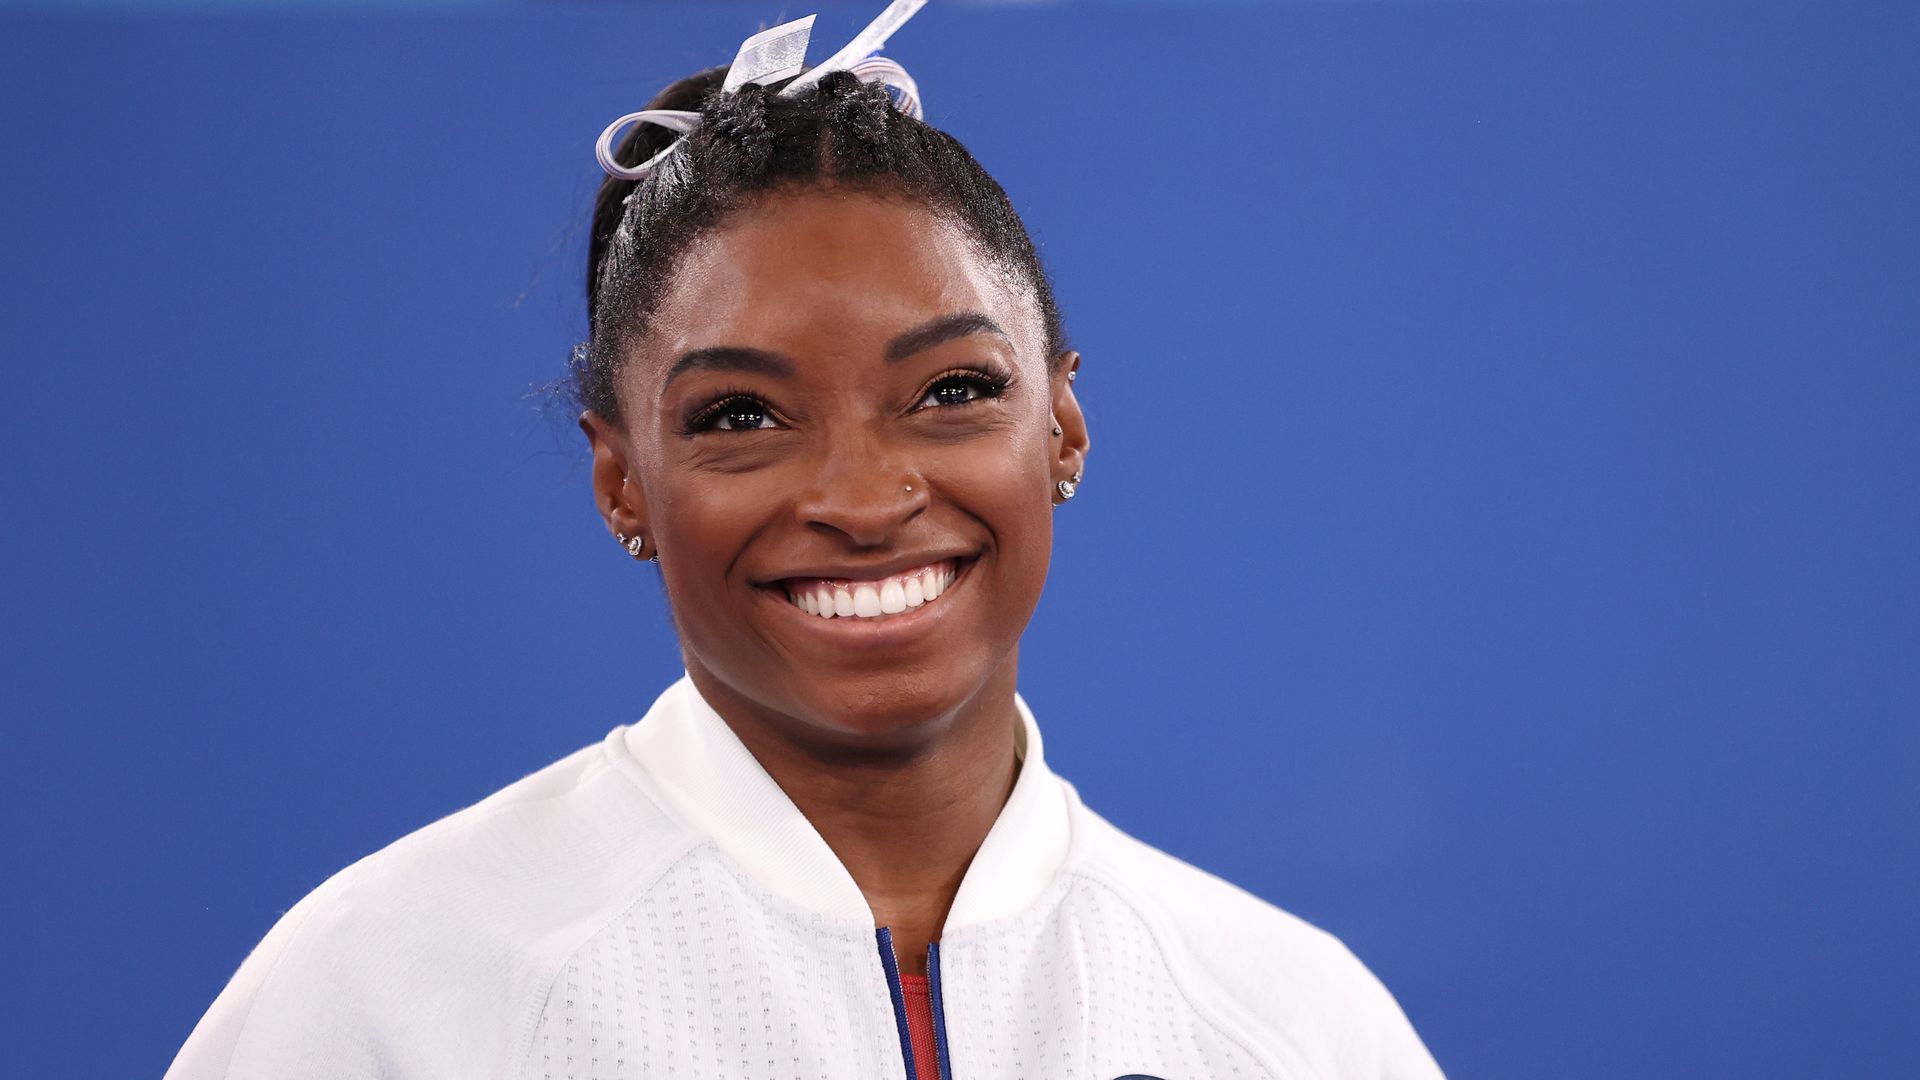 Simone Biles of Team United States smiles during the Women's Team Final on day four of the Tokyo 2020 Olympic Games at Ariake Gymnastics Centre on July 27, 2021 in Tokyo, Japan.